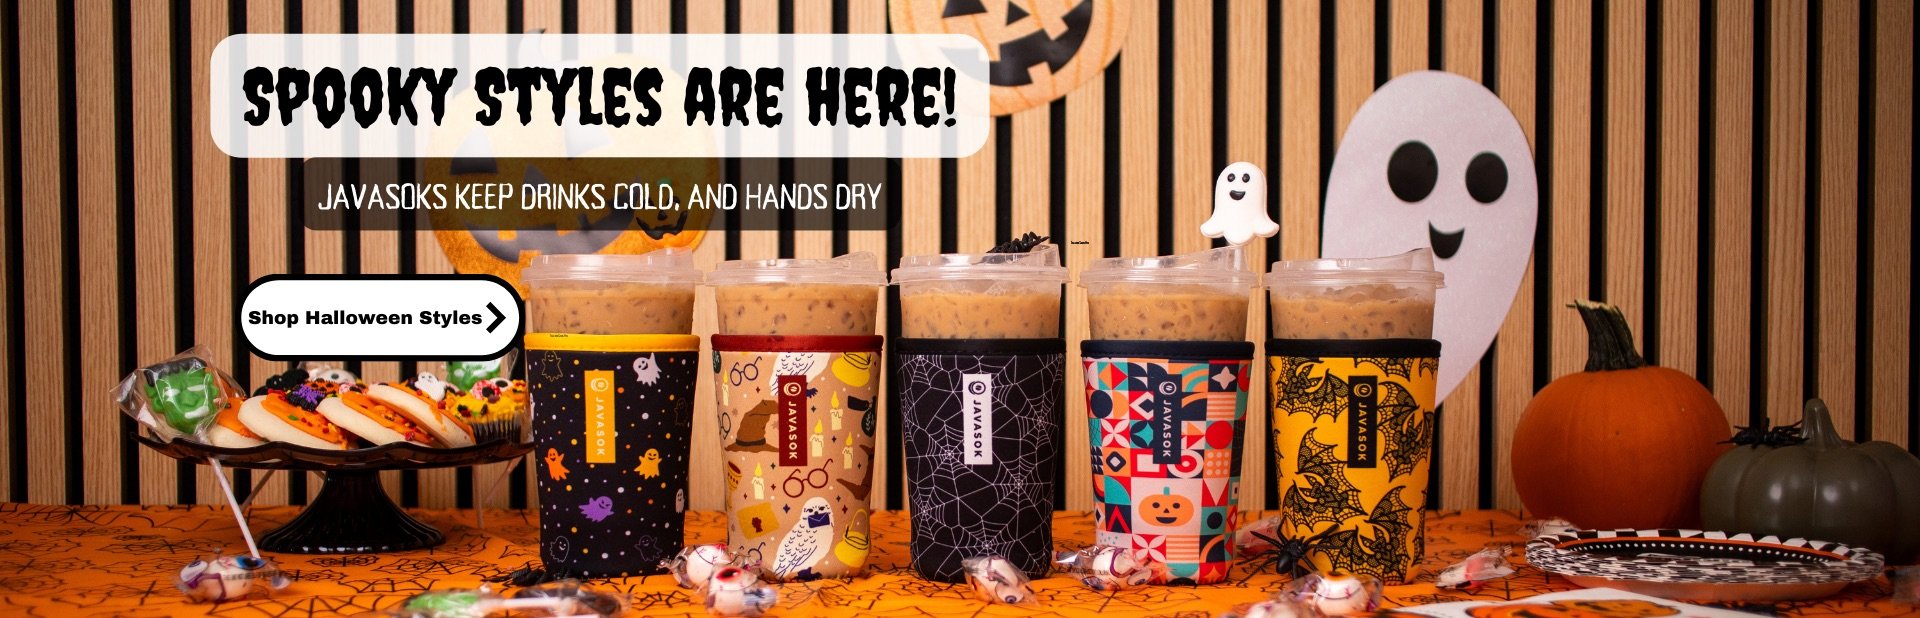 Spooky styles are here! JavaSoks keep your drinks cold and your hands dry.